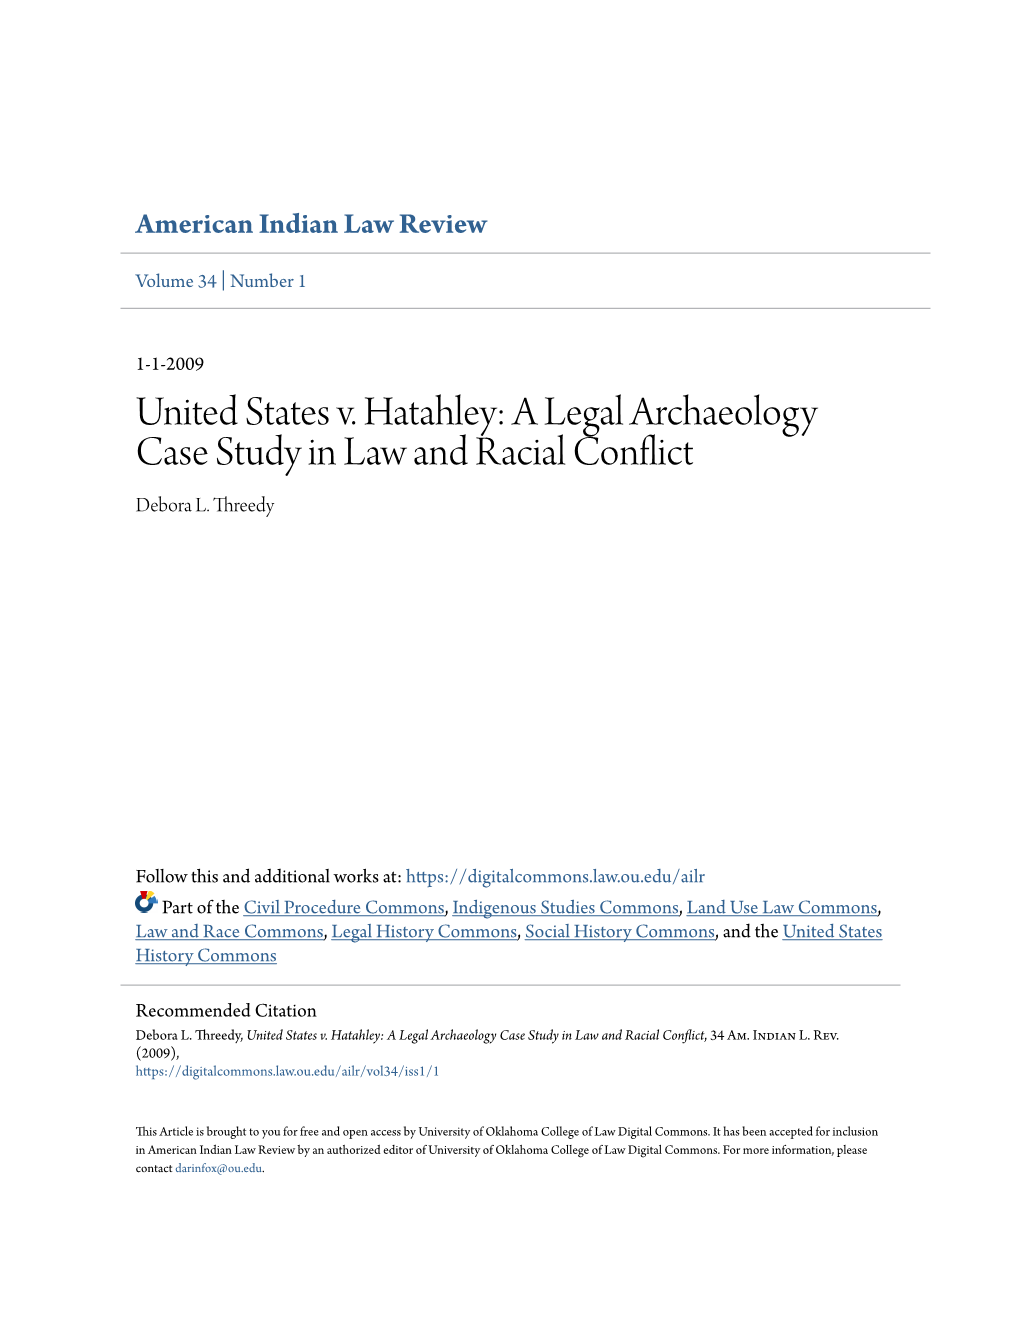 United States V. Hatahley: a Legal Archaeology Case Study in Law and Racial Conflict Debora L